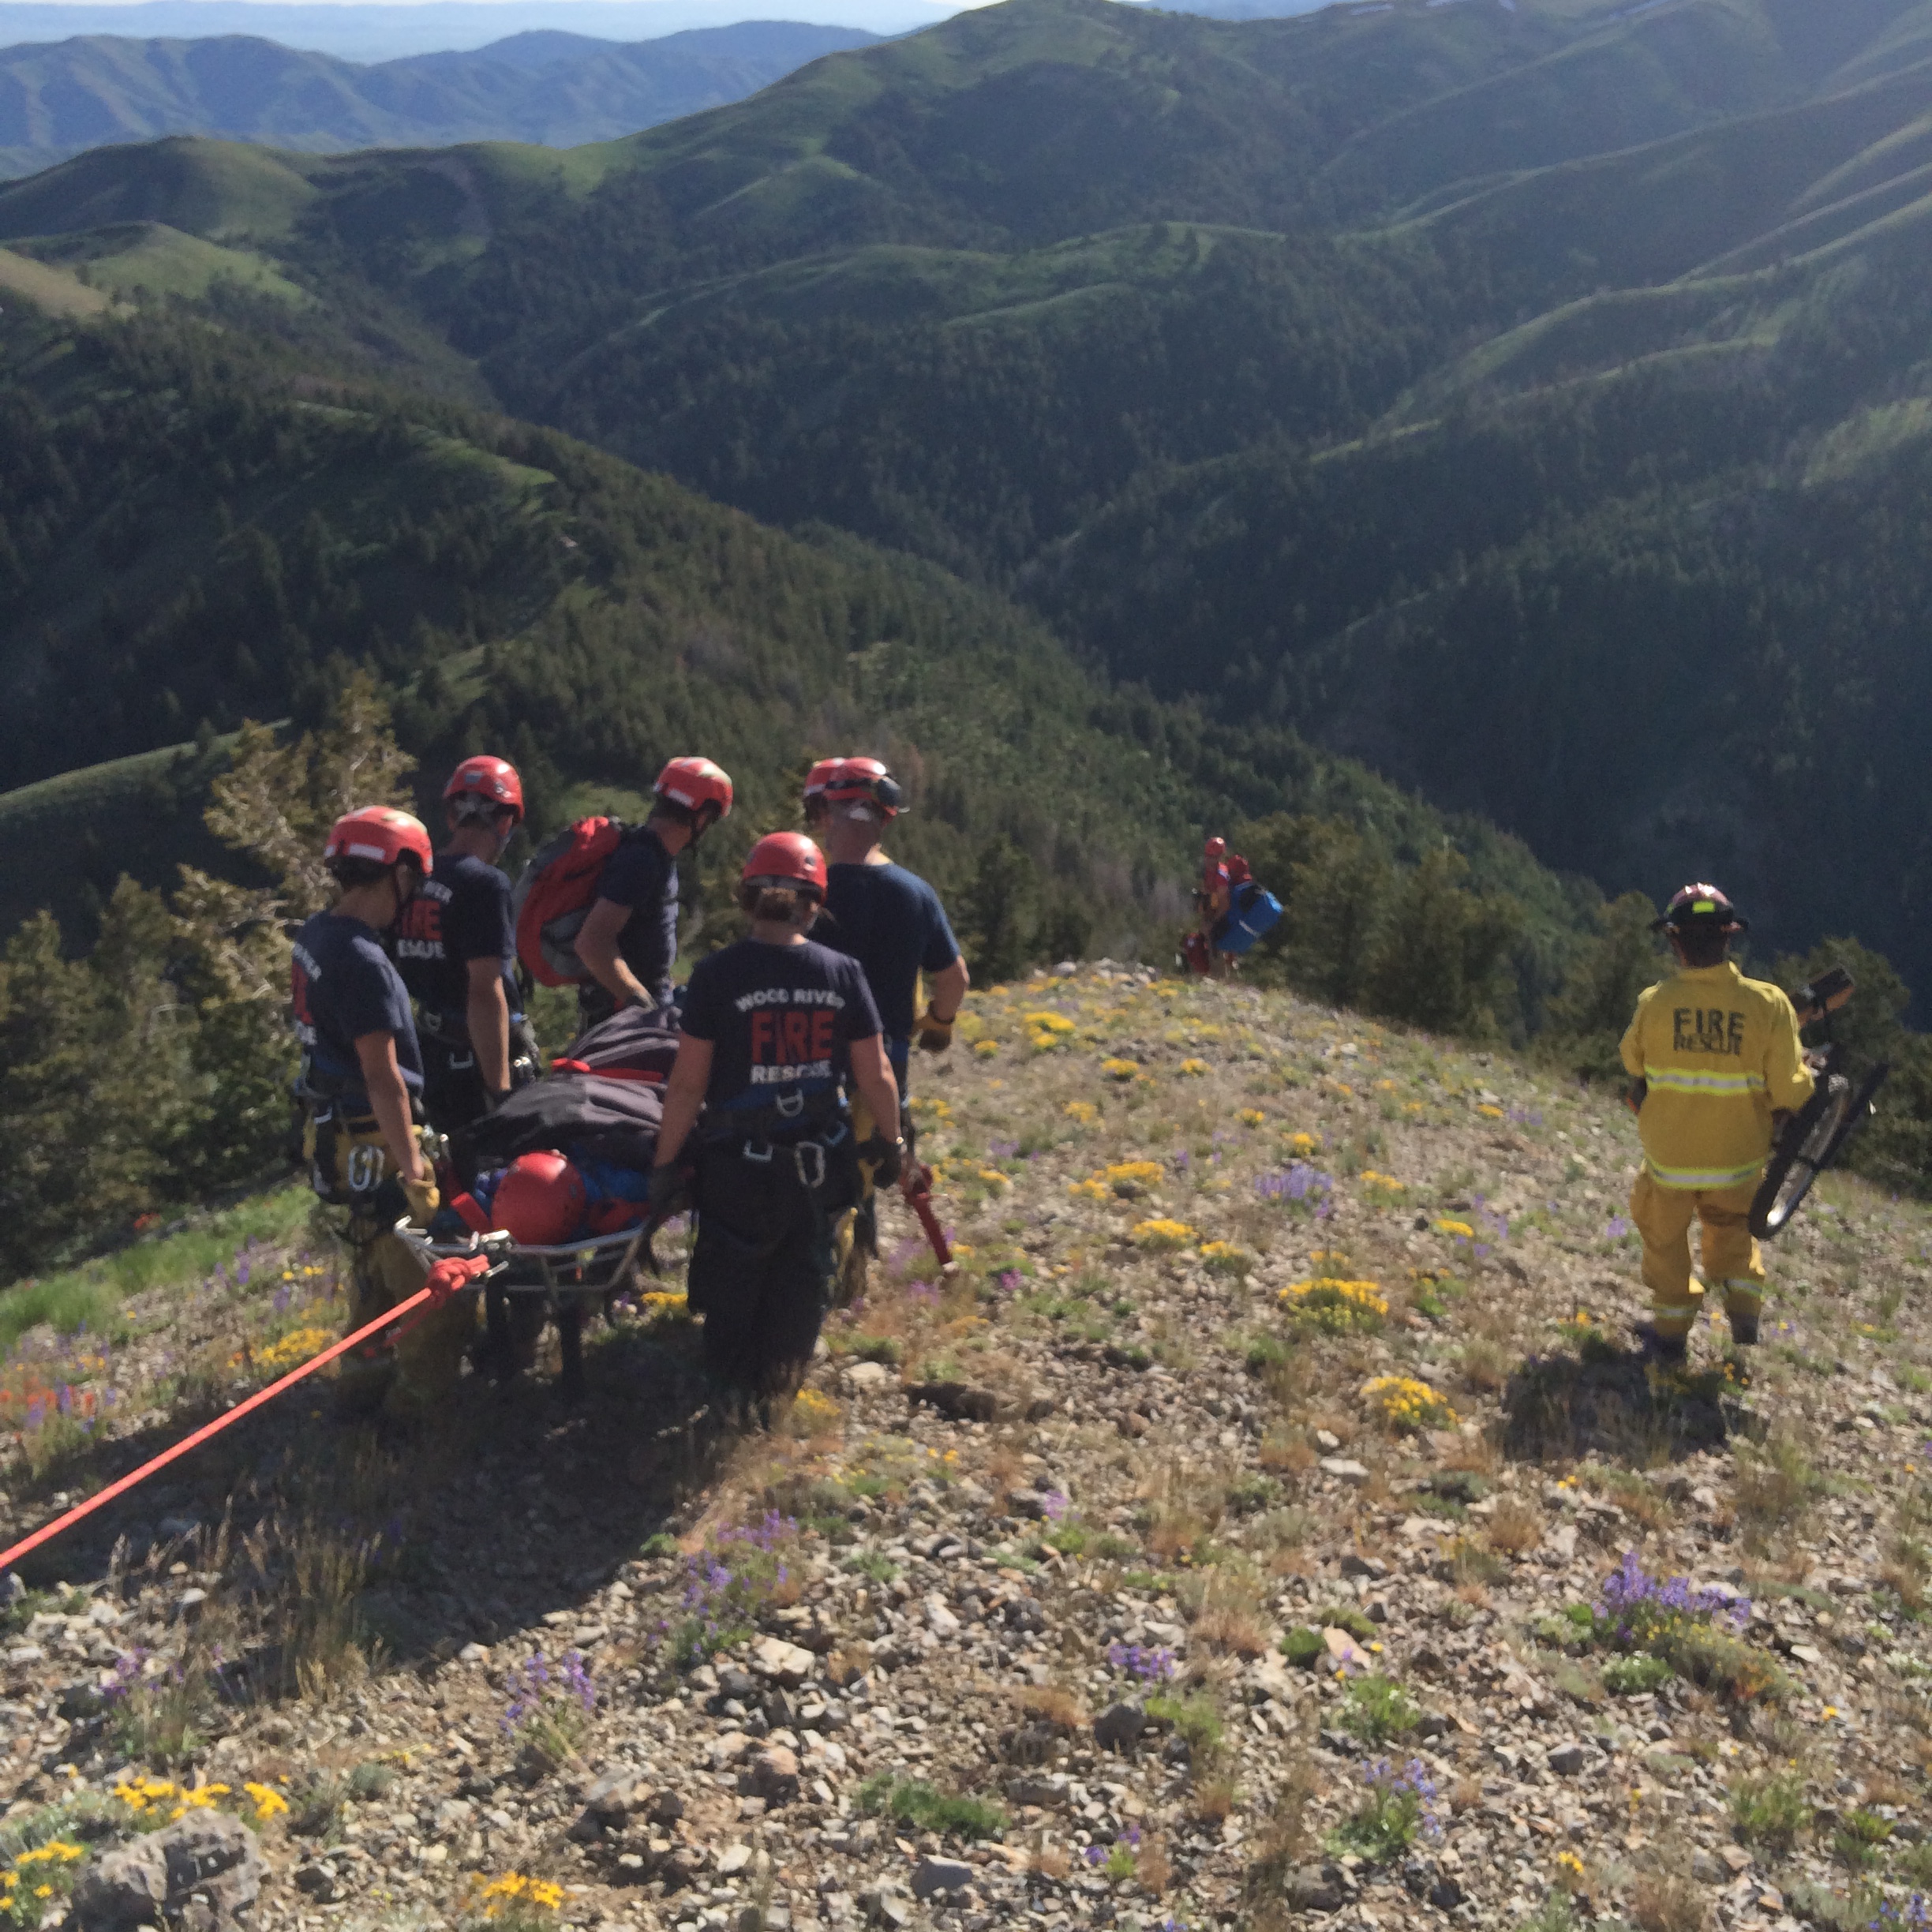 Wood River Fire & Rescue execute a rescue mission using Gaia GPS